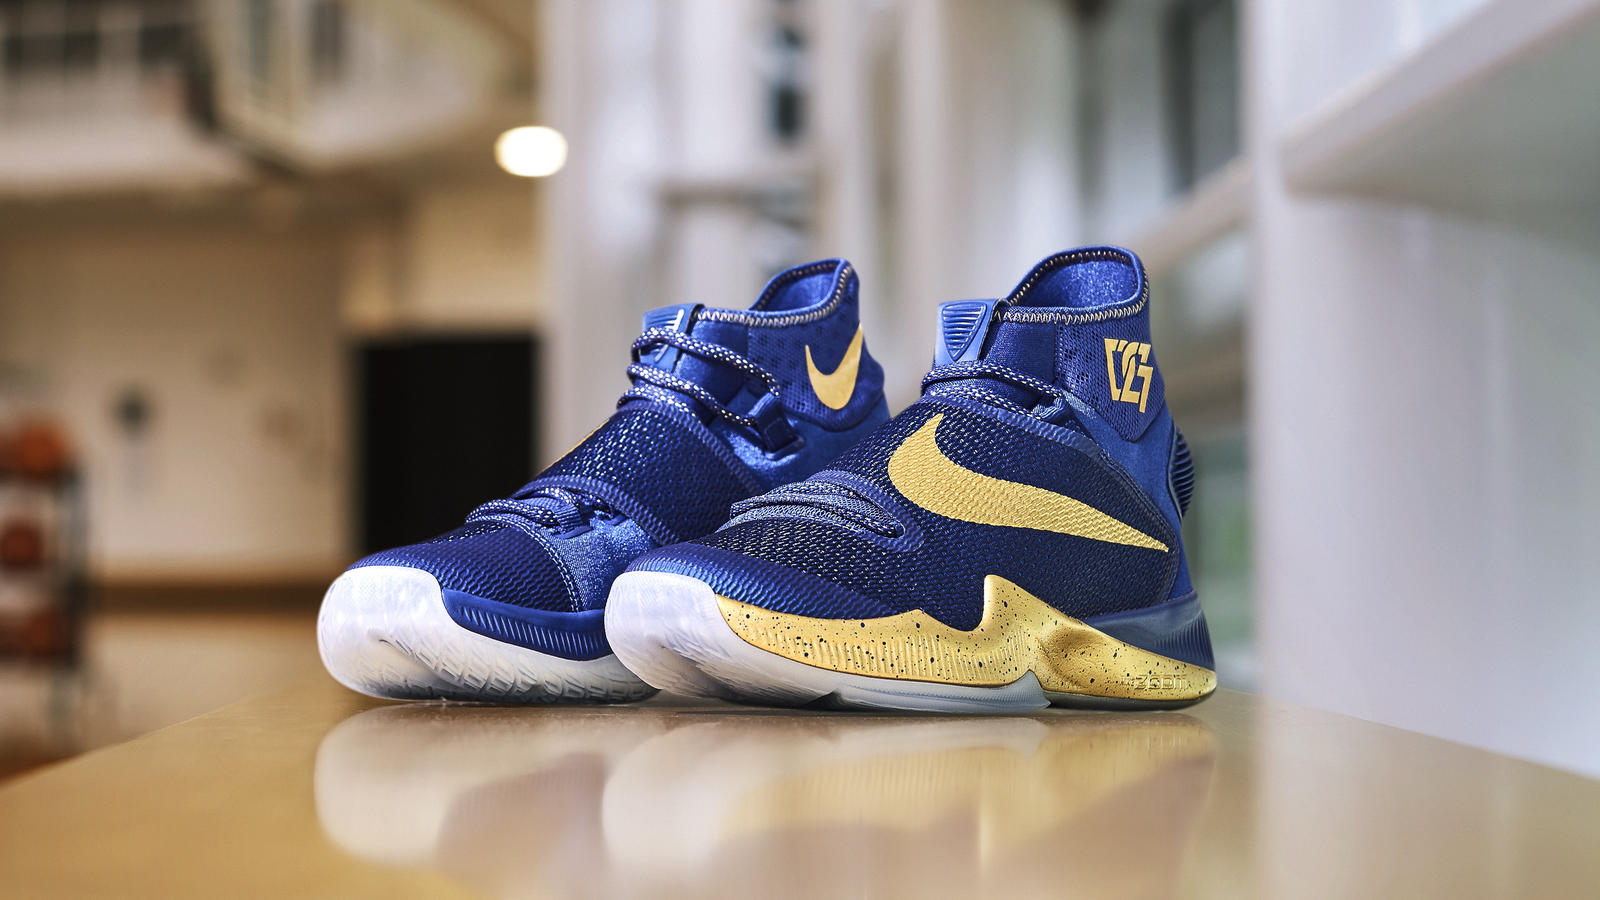 industria Cúal Inmigración Check Out Draymond Green's Game 2 PE of the Nike HyperRev 2016 - WearTesters